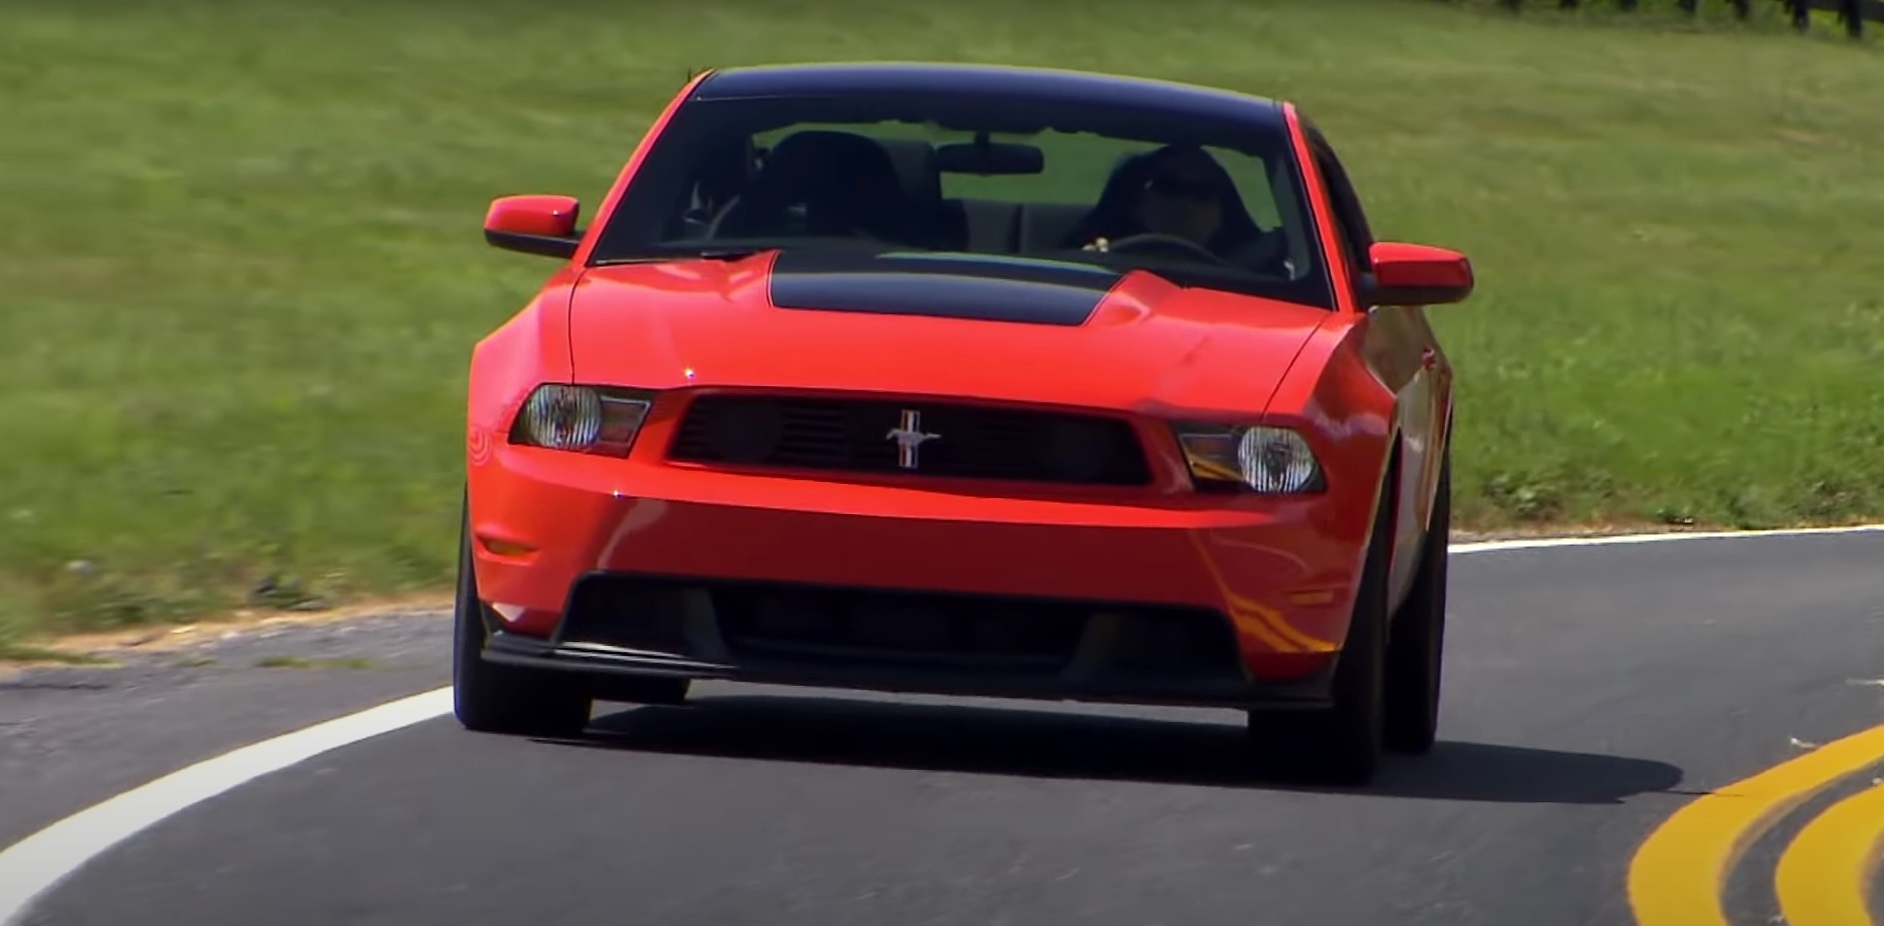 Video: 2012 Ford Mustang Boss 302 Road Test